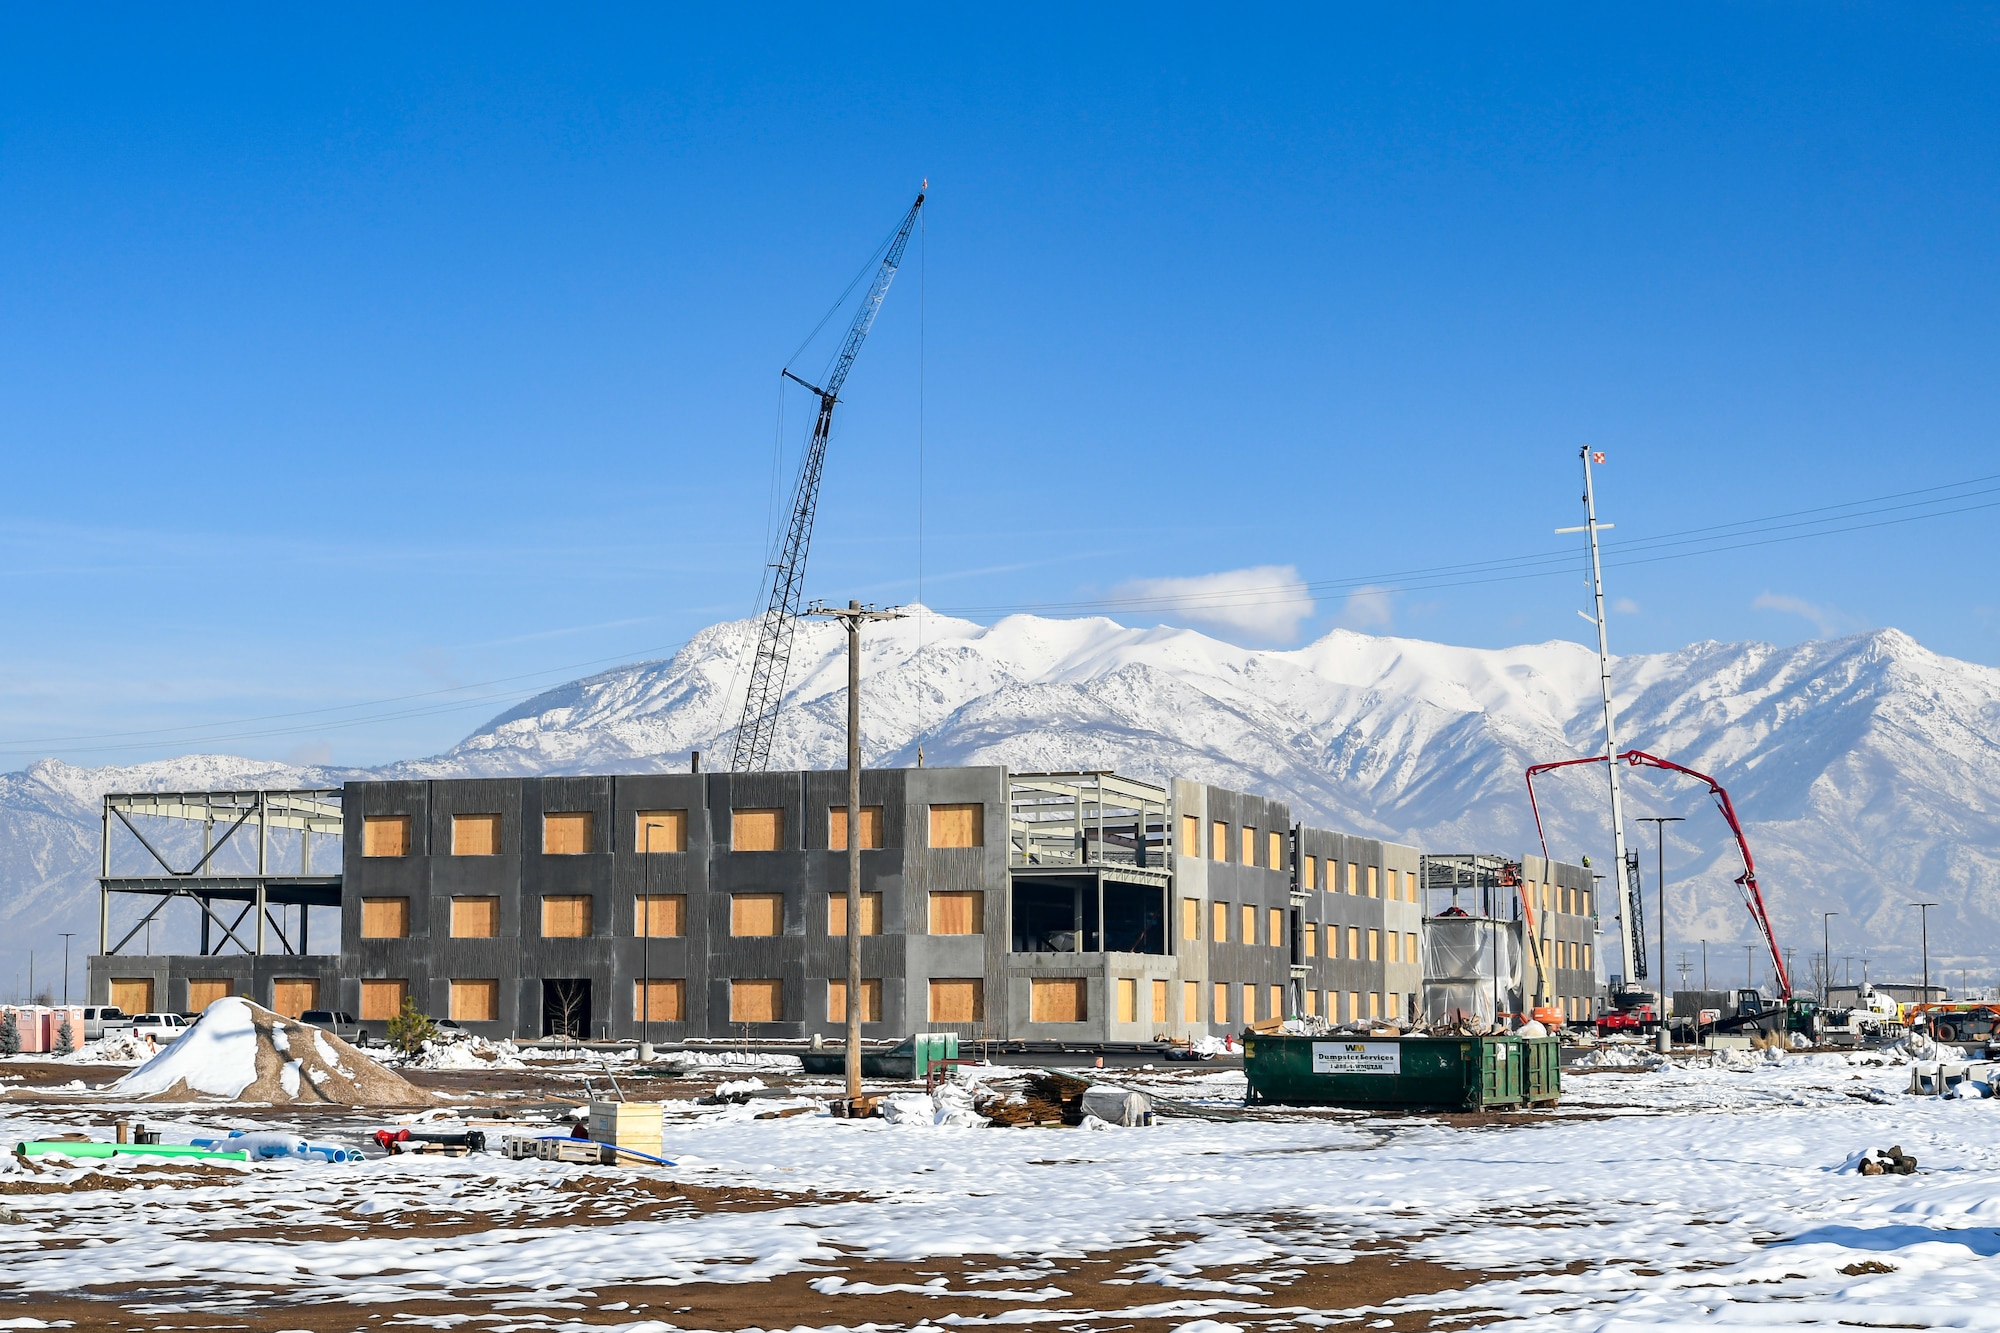 The construction site of the Northrup Grumman Roy Innovation Center situated adjacent to the Hill Aerospace Museum appears with snow covered ground, blue skies, and snow-capped mountains in the background.